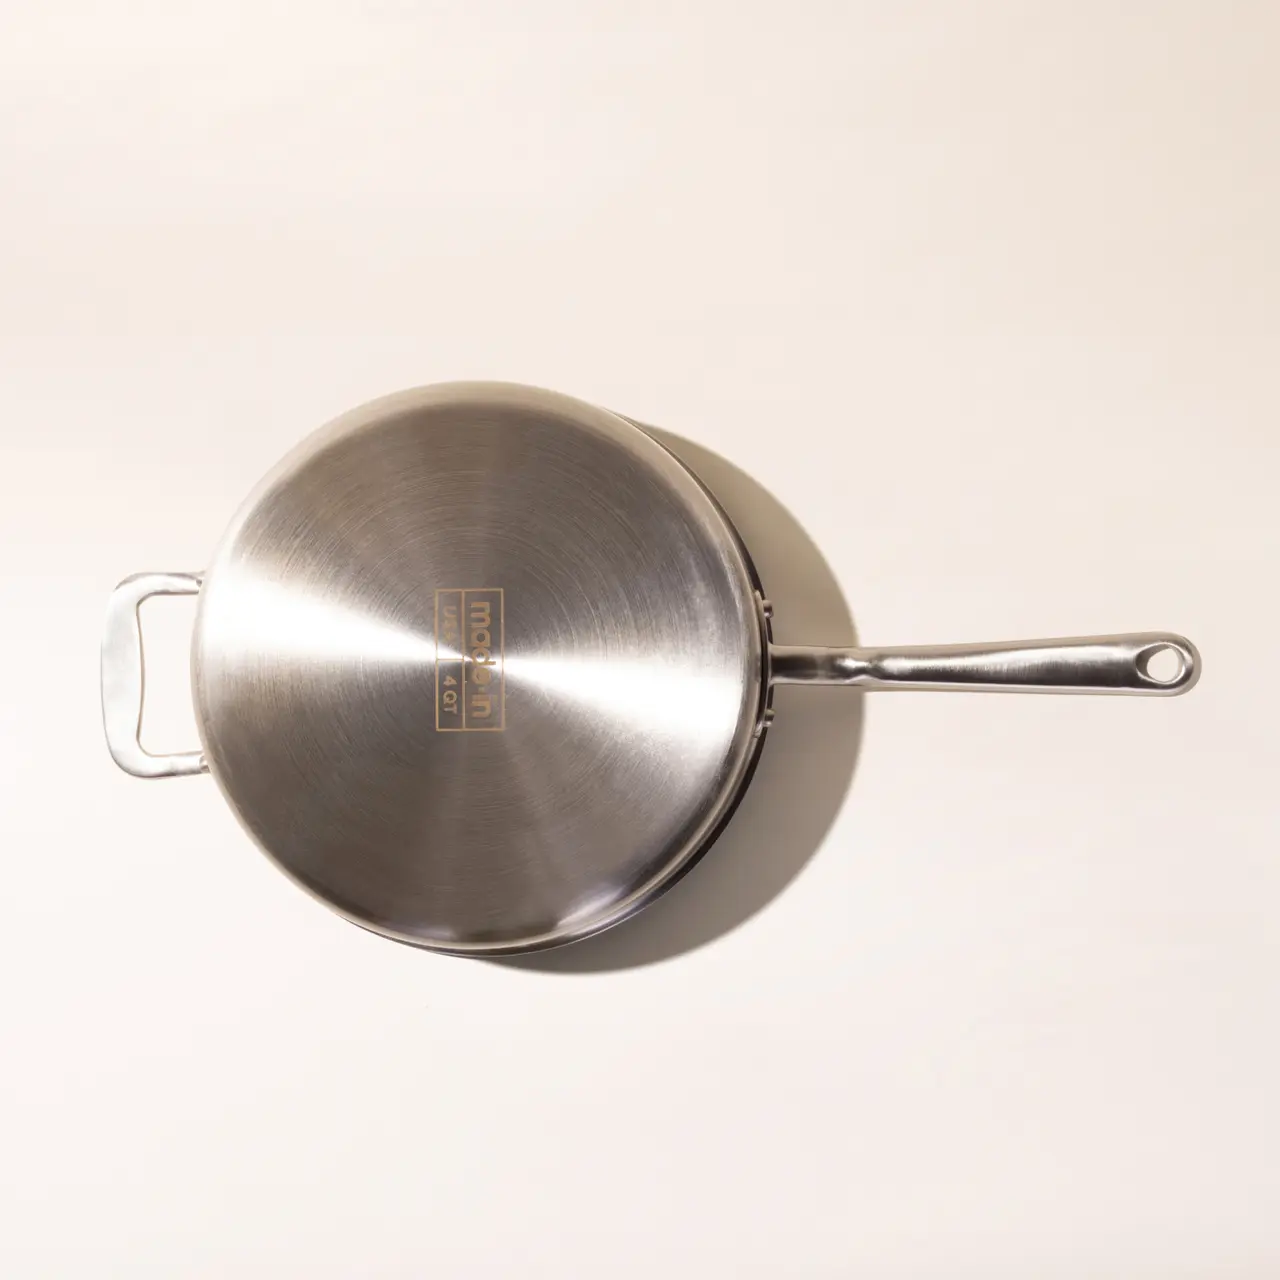 A stainless steel saucepan with a long handle positioned on a light surface.